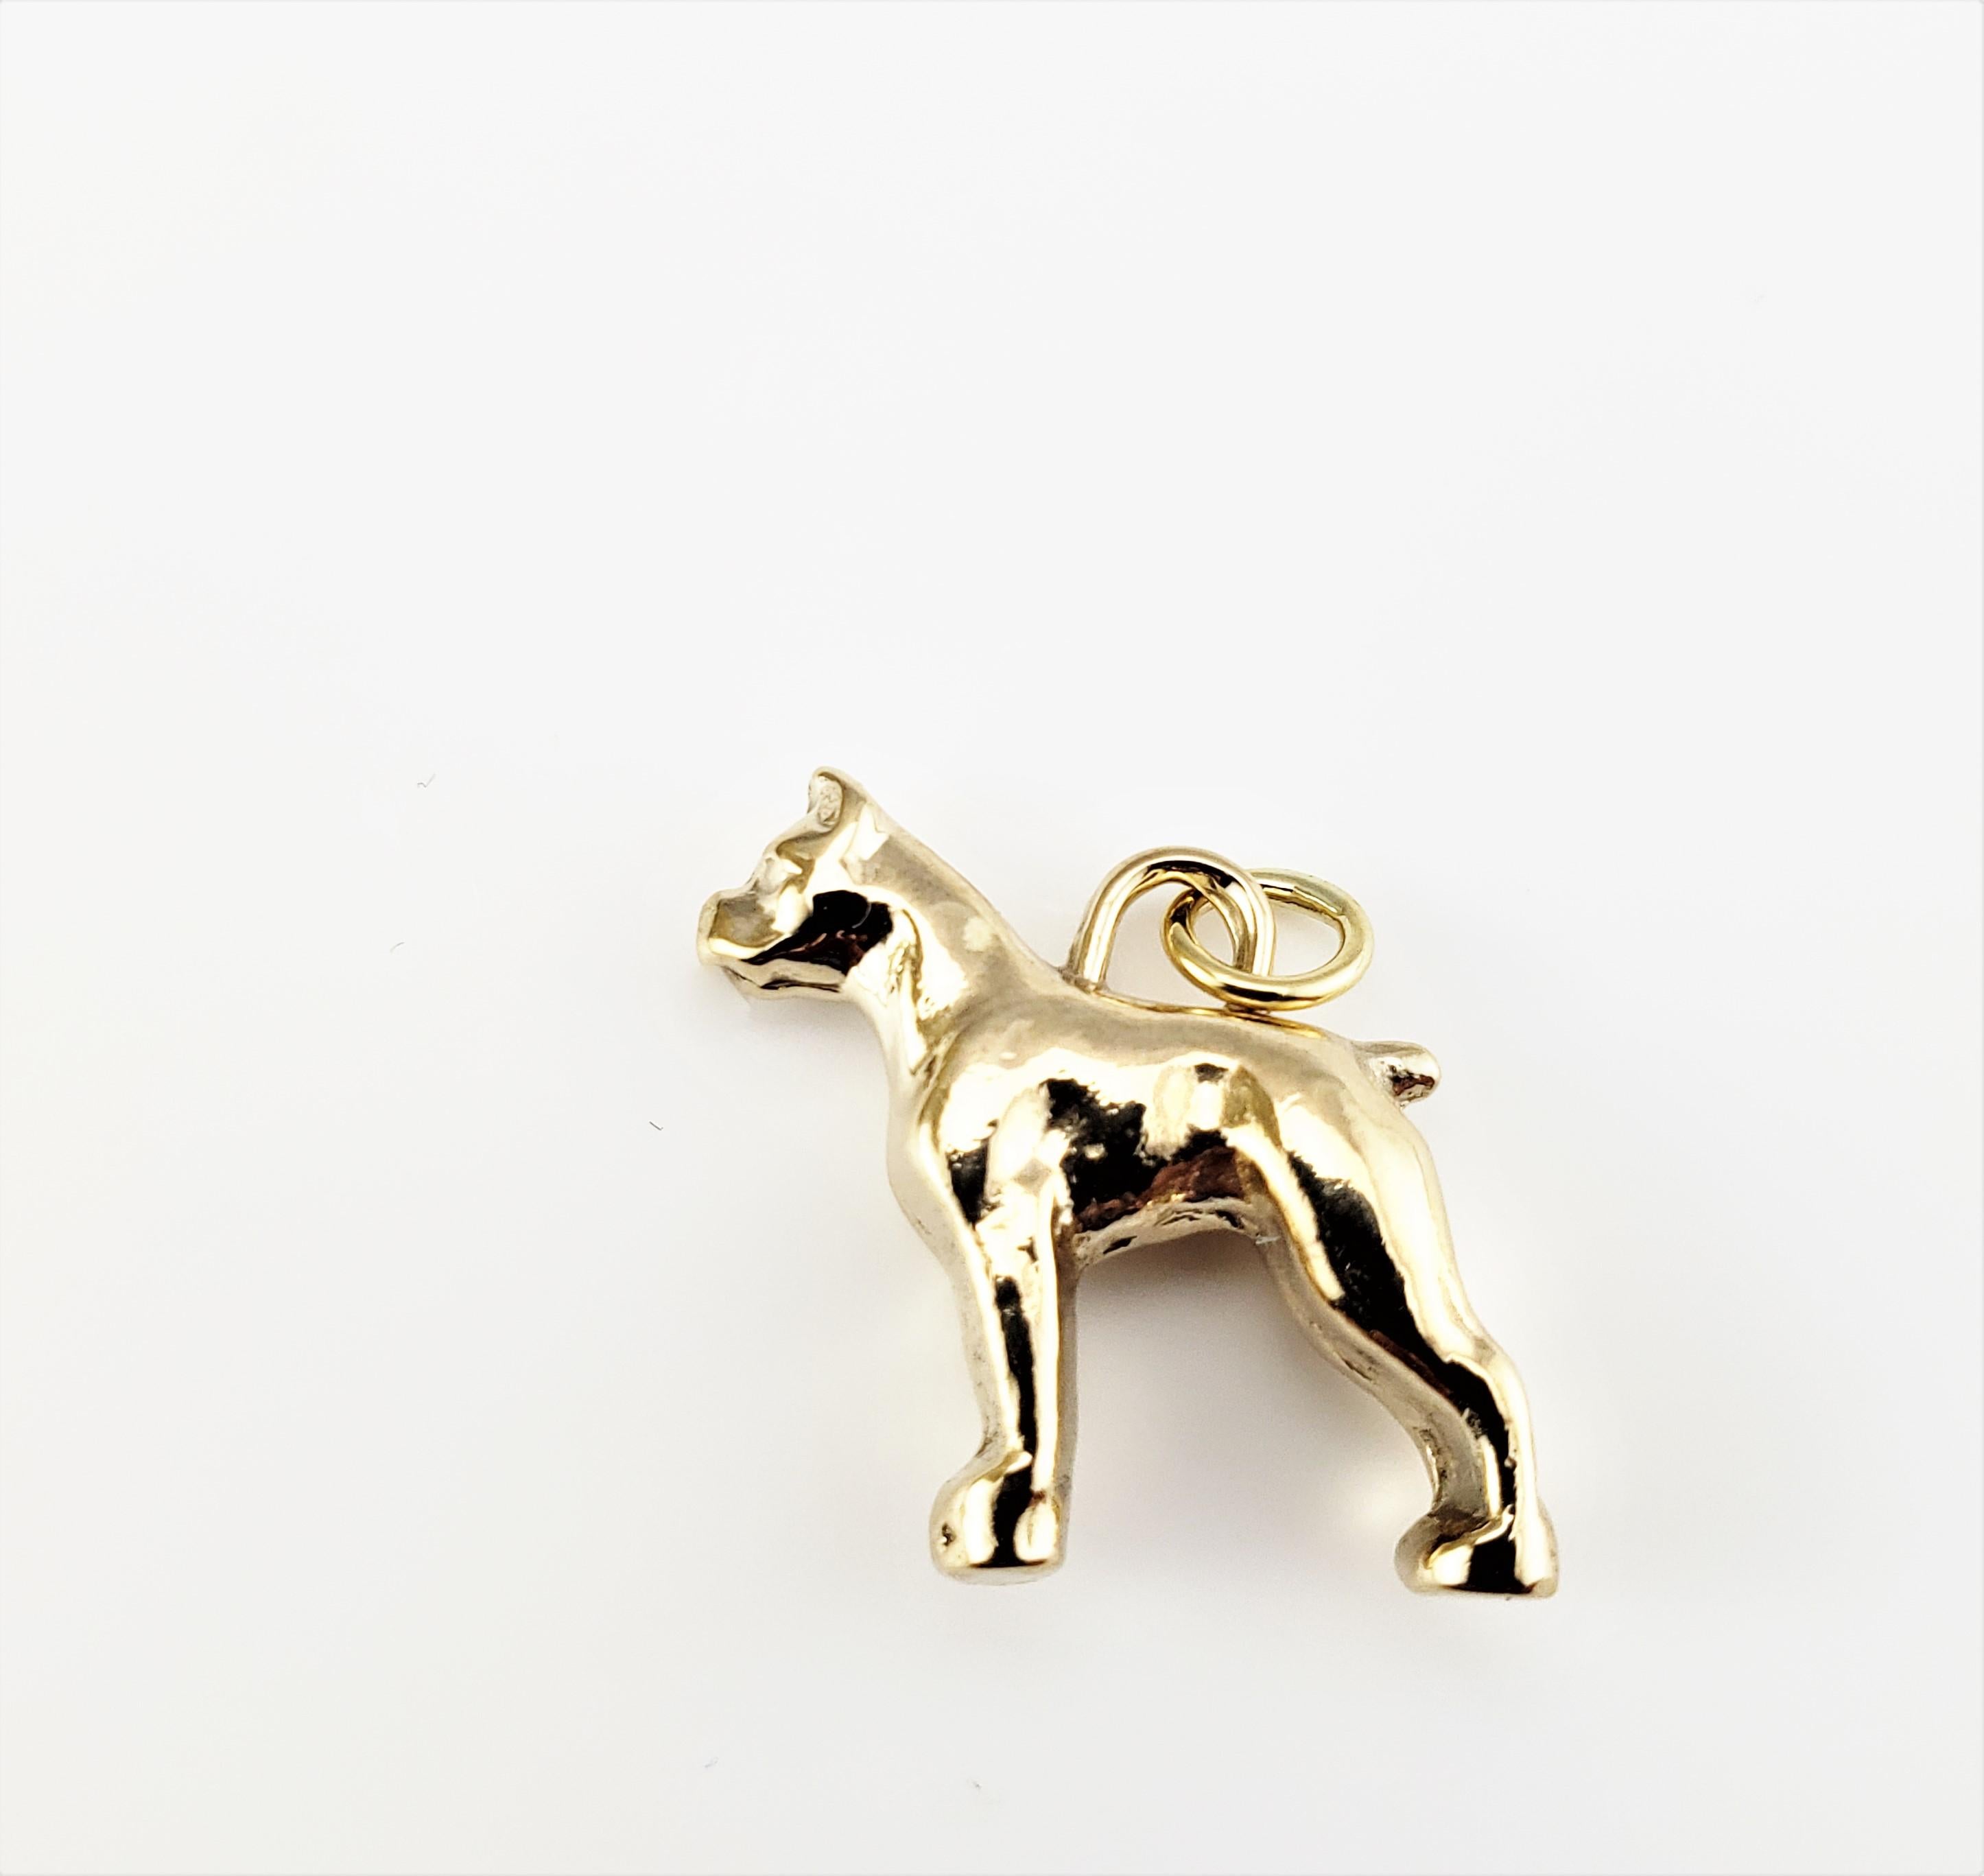 18 Karat Yellow Gold Boxer Dog Charm-

The boxer is known for their intelligence and devotion, making them a family favorite!

This lovely 3D charm features a beautifully detailed boxer crafted in classic 18K yellow gold.

*Chain not included

Size: